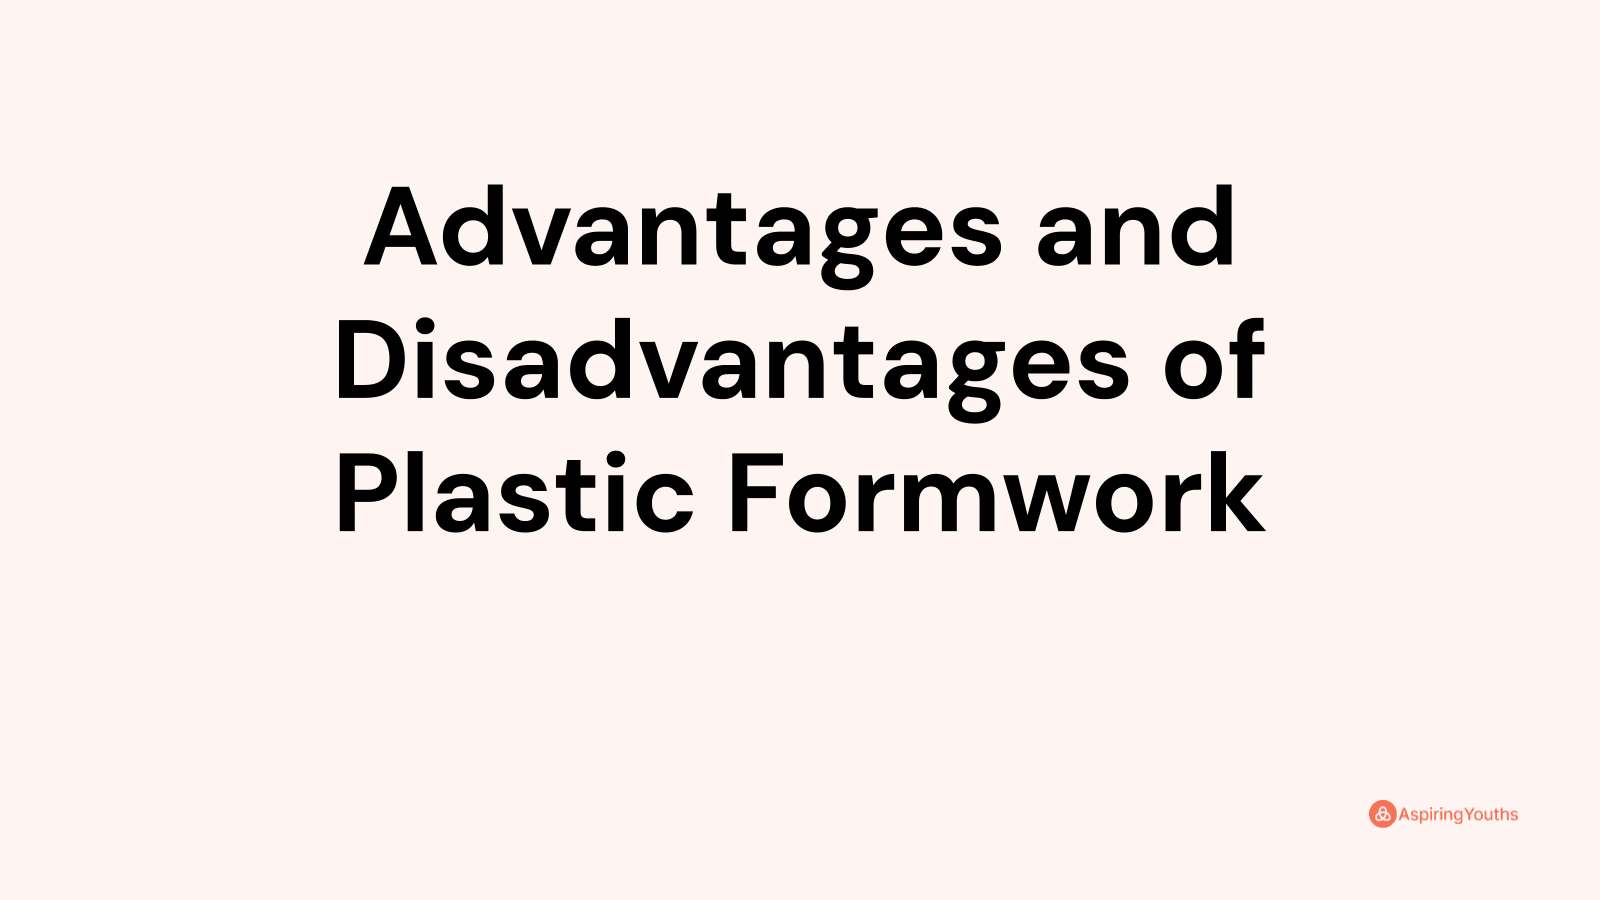 Advantages and disadvantages of Plastic Formwork